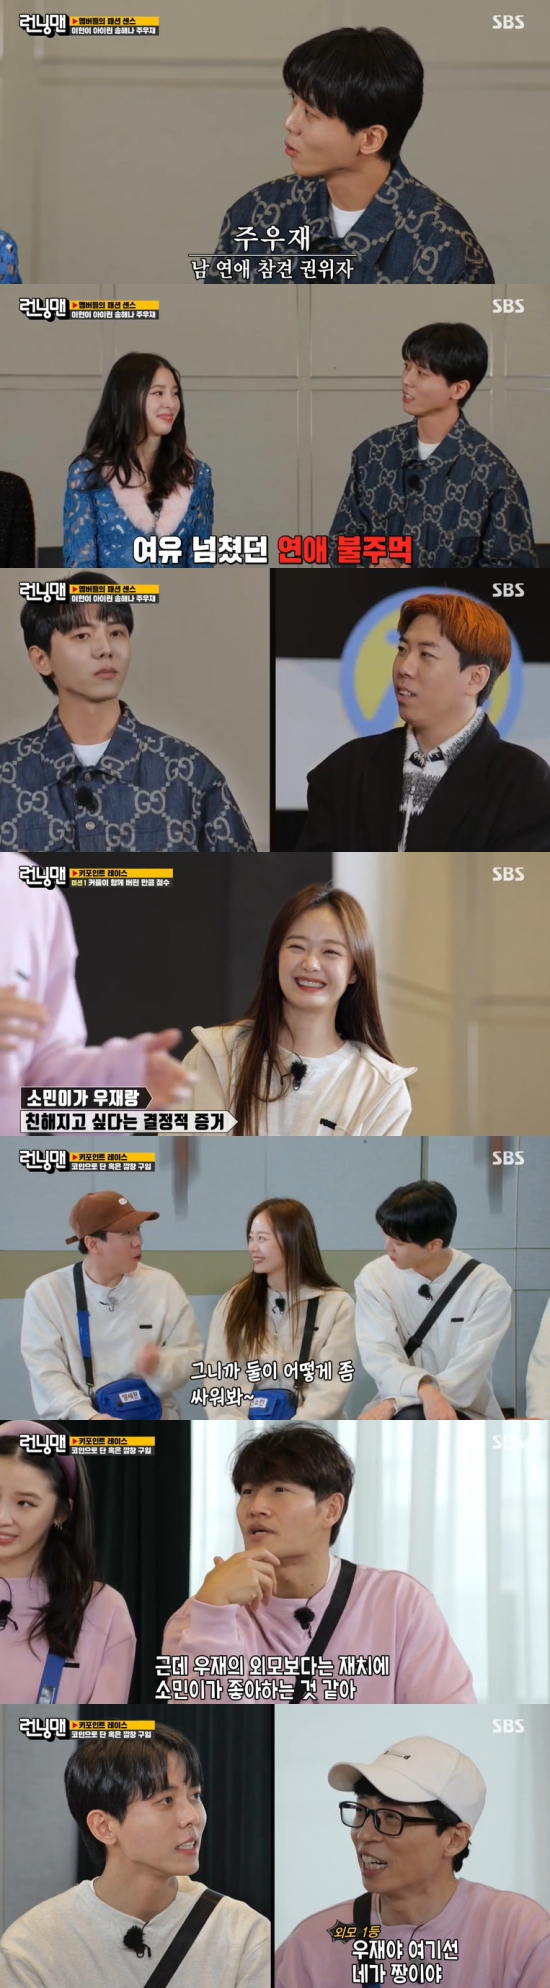 On SBS Running Man broadcasted on the 16th, Lee Hyun, Irene, Songhai and Ju Woo Jae appeared as guests.On this day, the production team prepared a fashion fair to cover the fashion rankings of the members.Lee Hyun, Irene, Songhai and Joo Woo-jae were invited as fashion experts, and the four poured out uncompromising evaluations of the members fashion.Since then, Yoo Jae-Suk has introduced Joo Woo-jae, Joo Woo-jae is an entertainment program MC.Have you two ever met on a dating program (with Yang Se-chan)? asked Yang Se-chan, Its a love affair with Woo Jae and Hogu.I was more popular than Woojae at the time. He was not popular. The children hate him. I was confident when I came in, actually, and I wanted to play because I had a weekly consultation and I had seen a lot of love.I went and tried it (Yang Se-chan) and it was attractive, it looks so handsome, he recalled.In addition, Jeon So-min expressed a favorable feeling to Joo Jae, and the members drove to a triangle relationship with Yang Se-chan.Jeon So-min quipped at Joo Woo-jae and Yang Se-chan, saying, Try to fight a little, take my heart away.In particular, Kim Jong-kook speculated that Woo Jae seems to like Somin because of his wittyness, not his appearance or this. Jeon So-min said, I like funny people.Its so fun, he said.Its cool to be a good man, but its not tremendously so, said Yoo Jae-Suk, who helped him, and he did not work as an appearance in the model industry.Yoo Jae-Suk encouraged you are a good man here, and Joo Woo-jae showed off his witty demeanor, saying, I will not deny it.Kim Jong-kook said, We also have a lot of guests.I do not envy you very much, Haha said. When I first walked the curtain, I just saw you and said, I wore luxury goods. Yoo Jae-Suk asked, I do not often meet people in the model system. Is Woo Jae popular in the model system? Songhai said firmly, saying, I do not know.Lee Hyun said, It is not a person who is mentioned so. Ji Seok-jin asked, Do not you say that he is okay while the younger models talk about the right thing?Lee Hyun said, The people who were the first to talk about it are Nam Joo Hyuk and Jang Yong Yong. He said, I am so glad that I have already shared it.Its not going to be hit or this way, he said.Lee Hyun praised the only friend who works like this in the model industry, and Songhai praised it as a real boyfriend.However, Lee Hyun said, So it is possible that it is.Photo = SBS broadcast screen